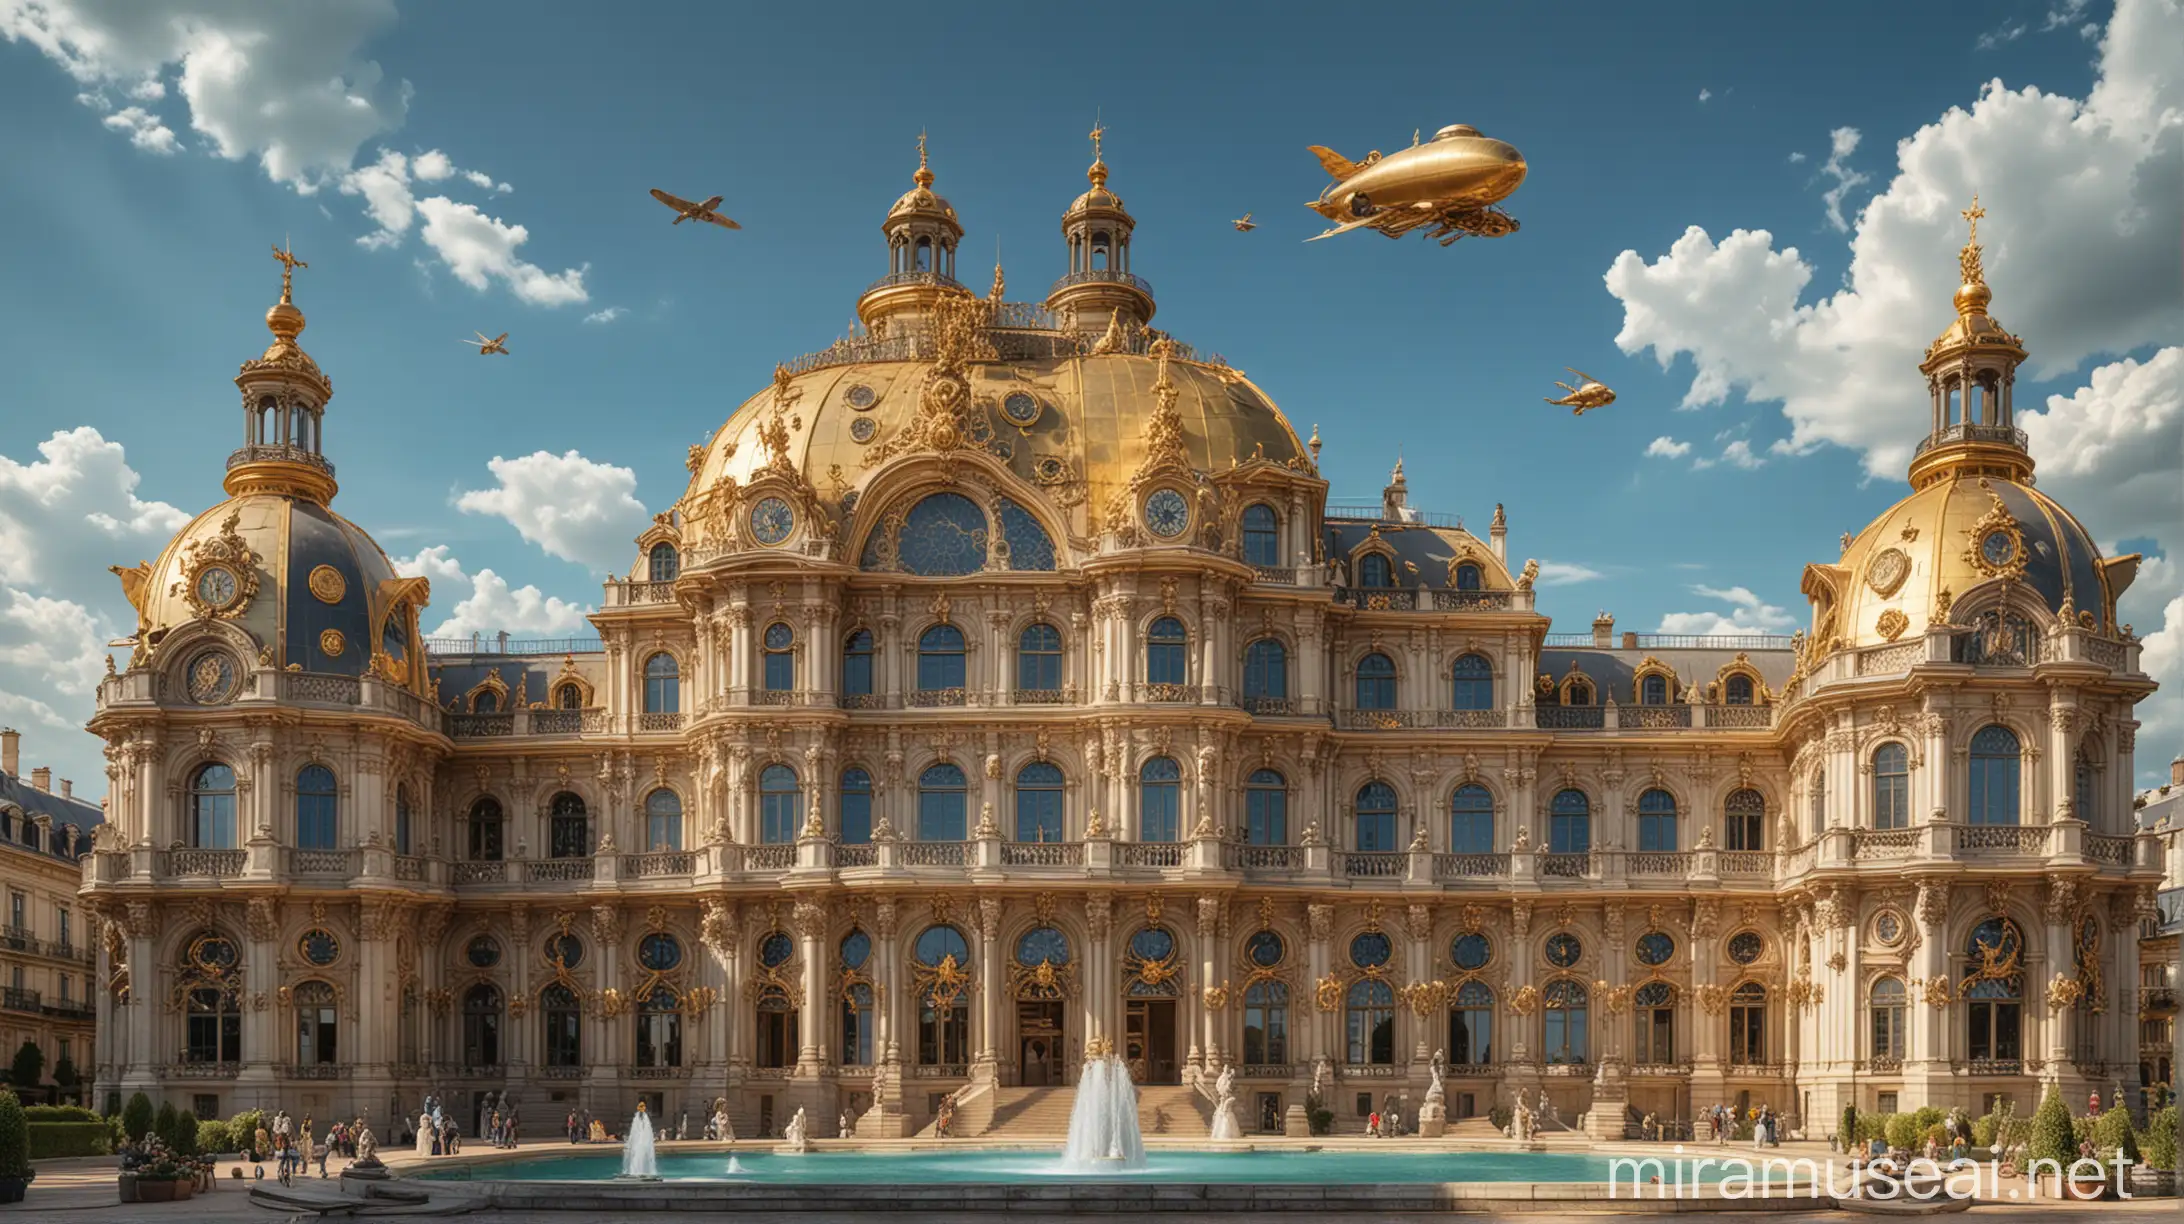 A gigantic French Baroque Palace with astrological details on the gold roof, colossal gardens with fountains, a baroque city and steampunk zeppelins in the blue sky